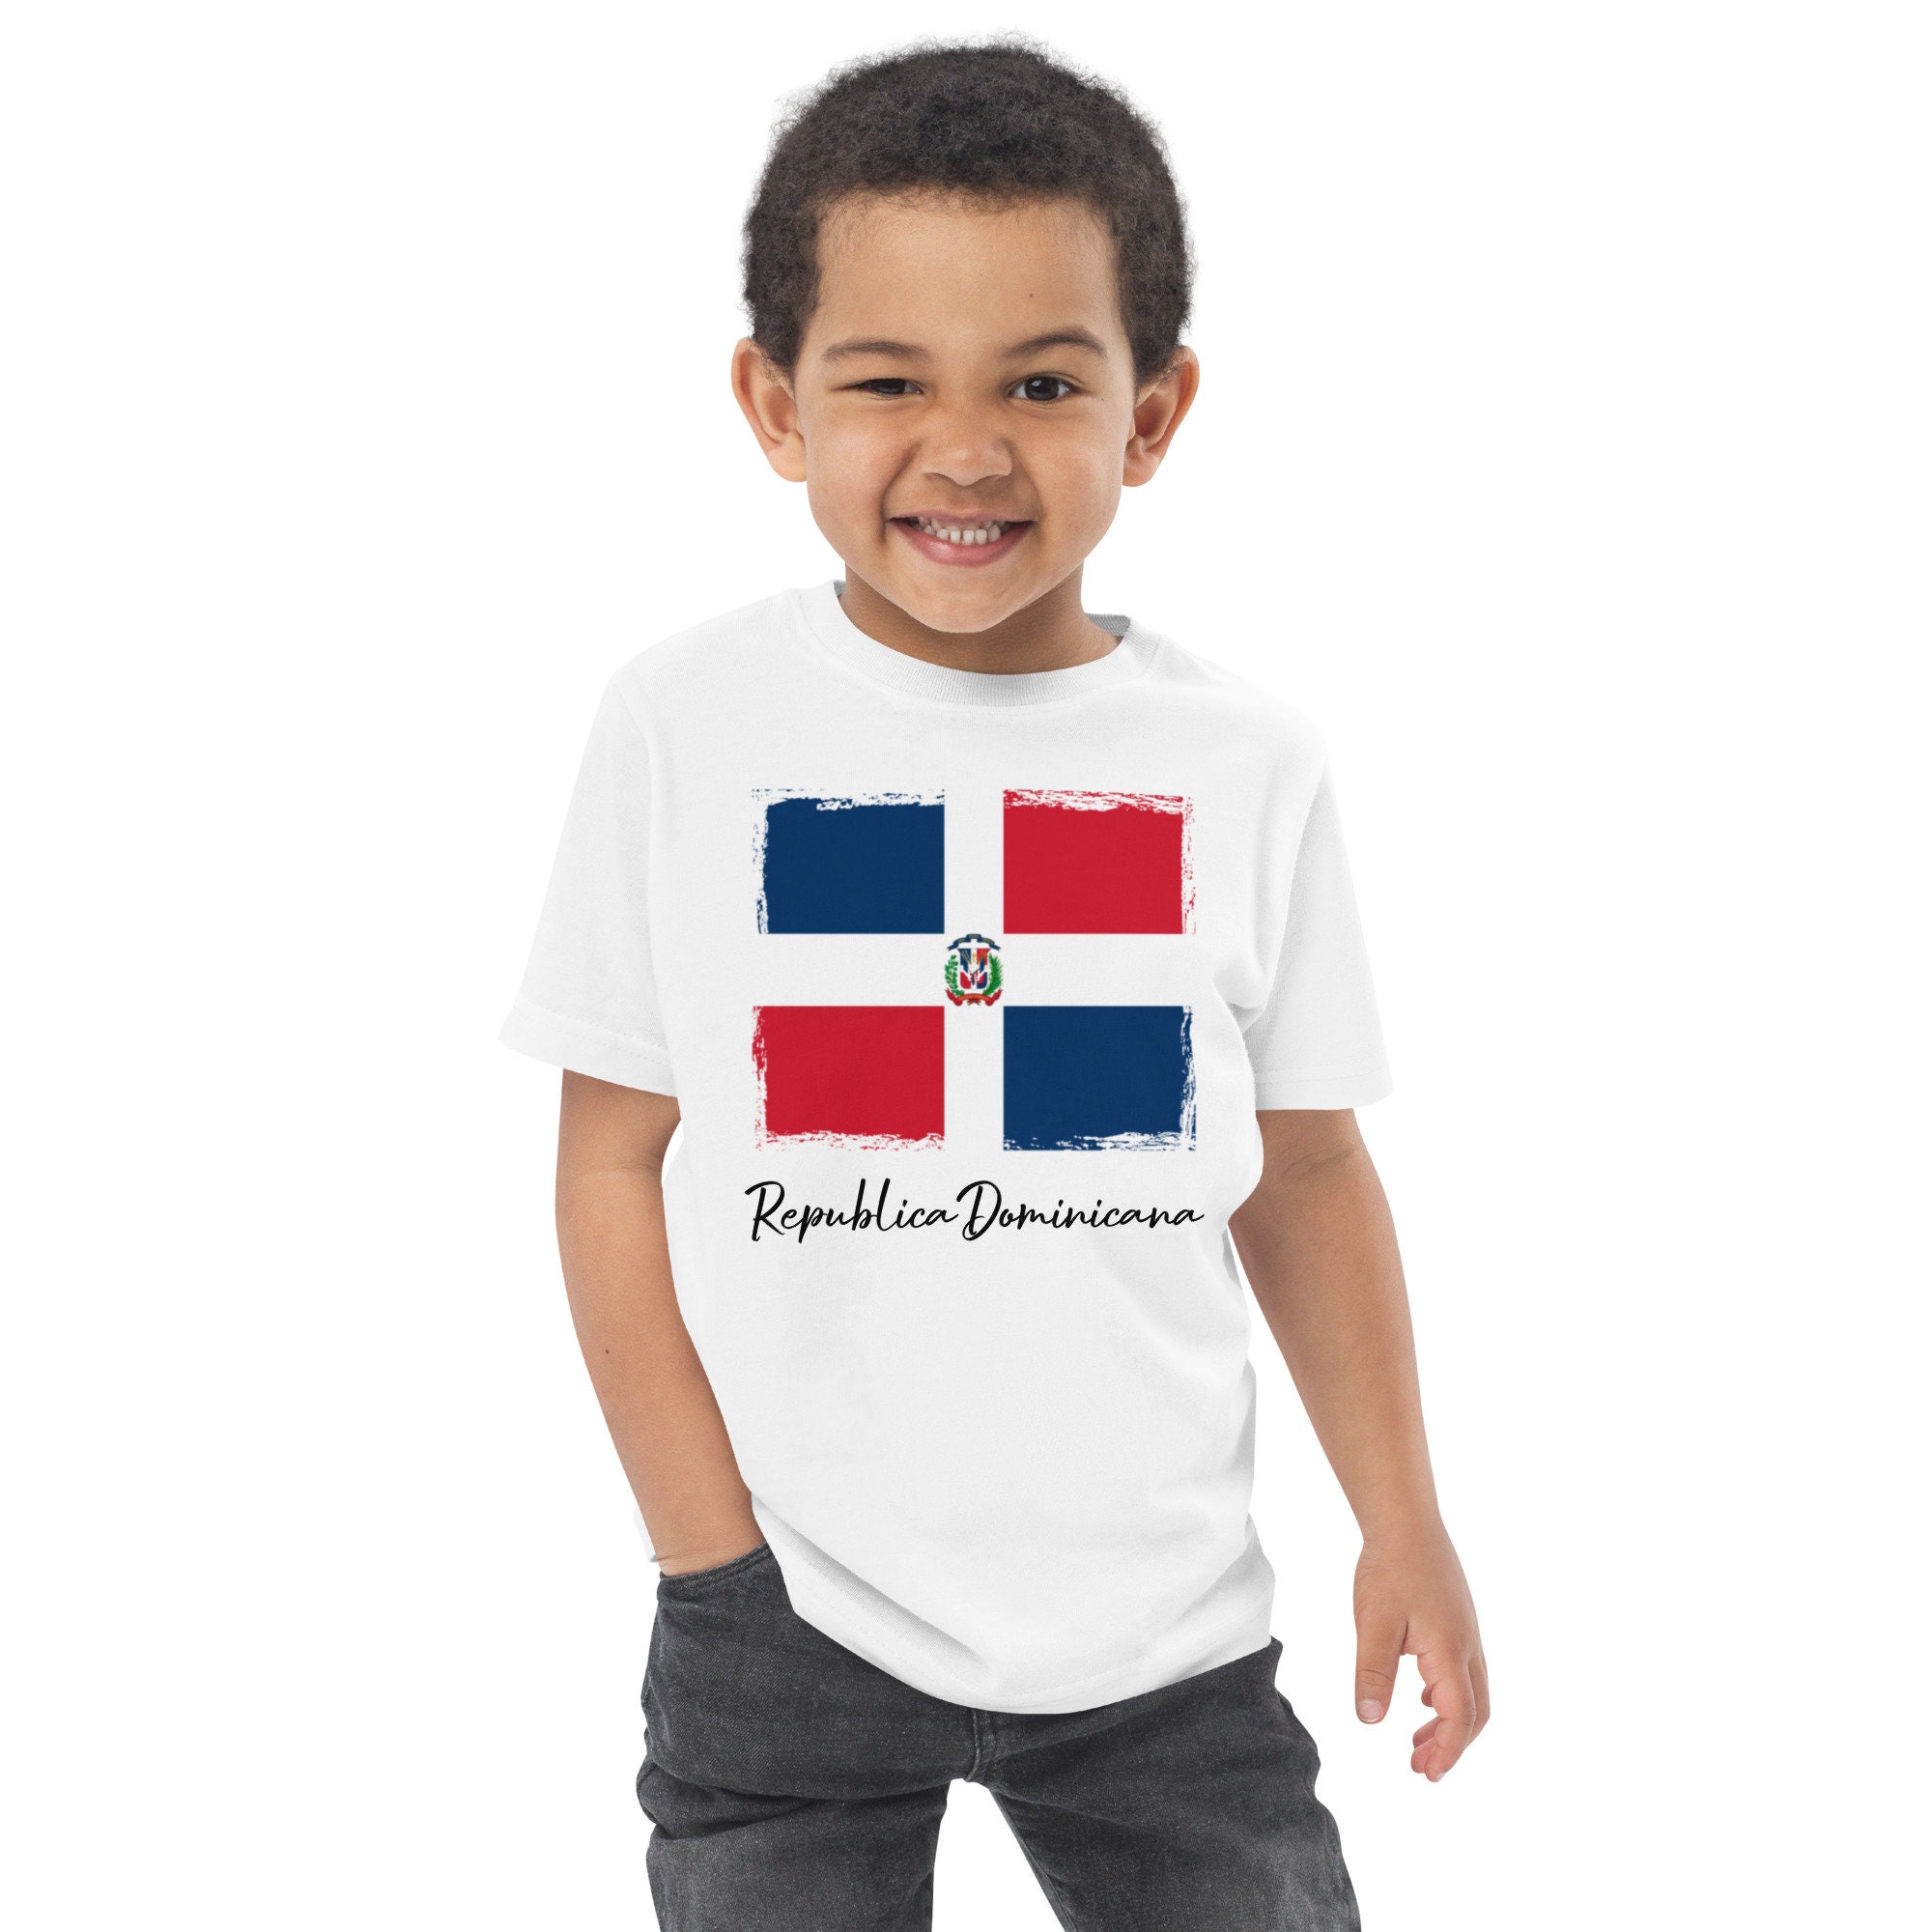 Dominican Republic flag - white t shirt holiday top design mens womens kids  baby